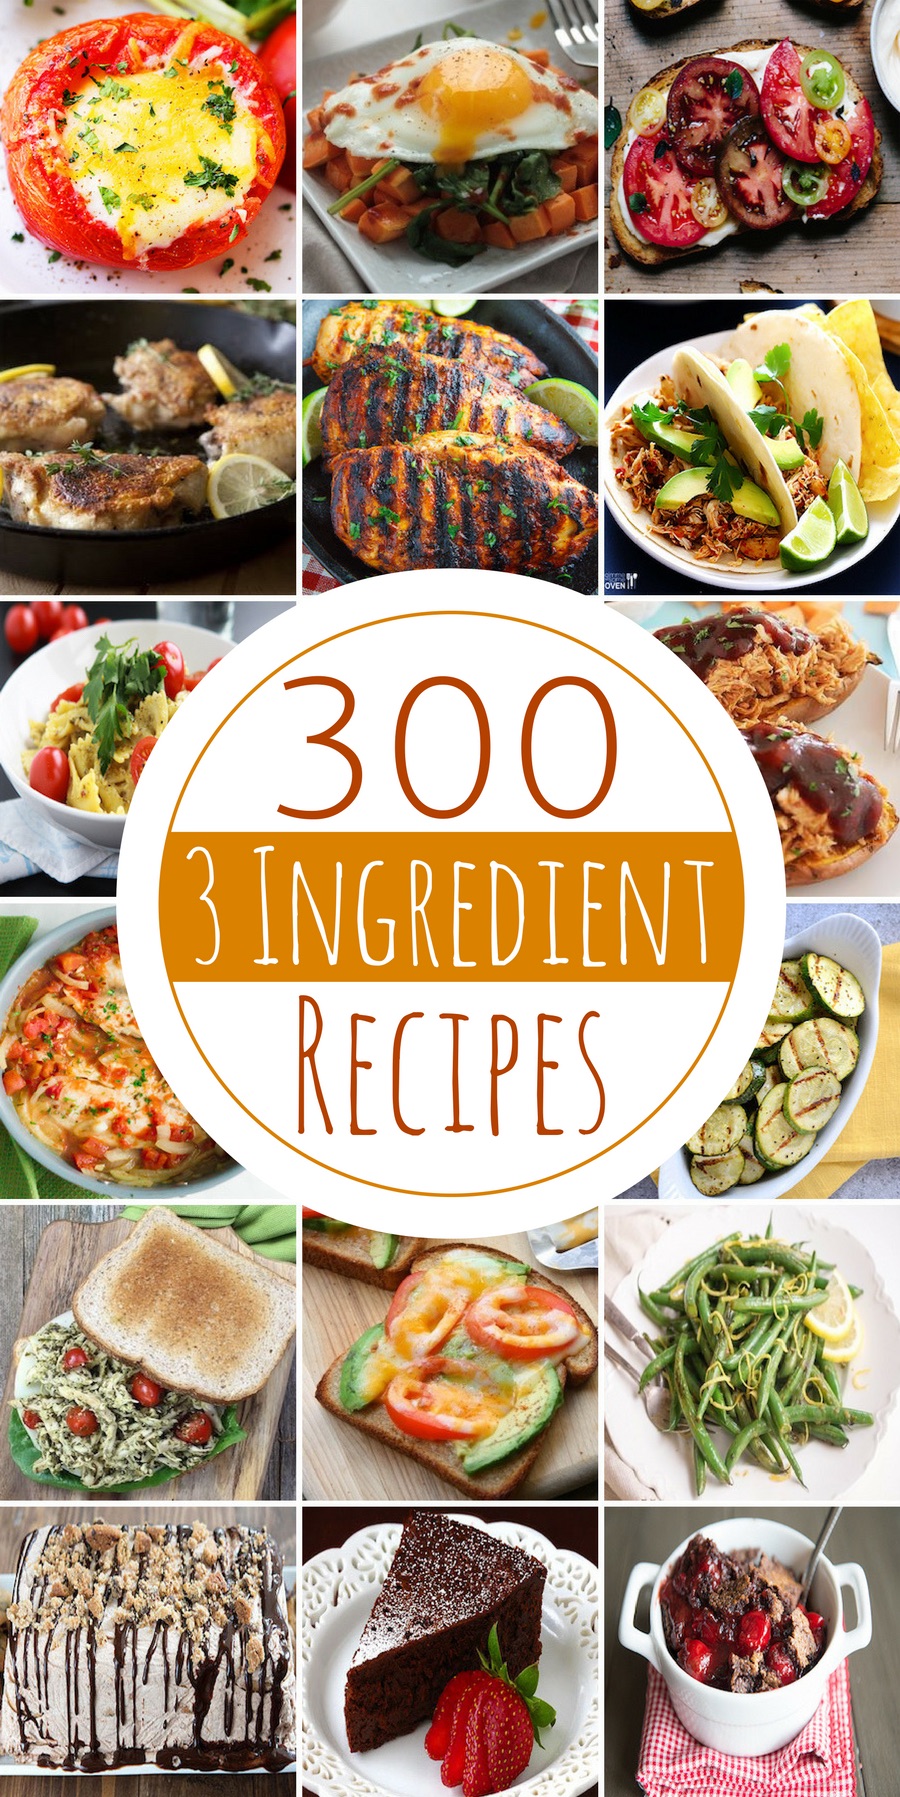 300 3 Ingredient Recipes Prudent Penny Pincher